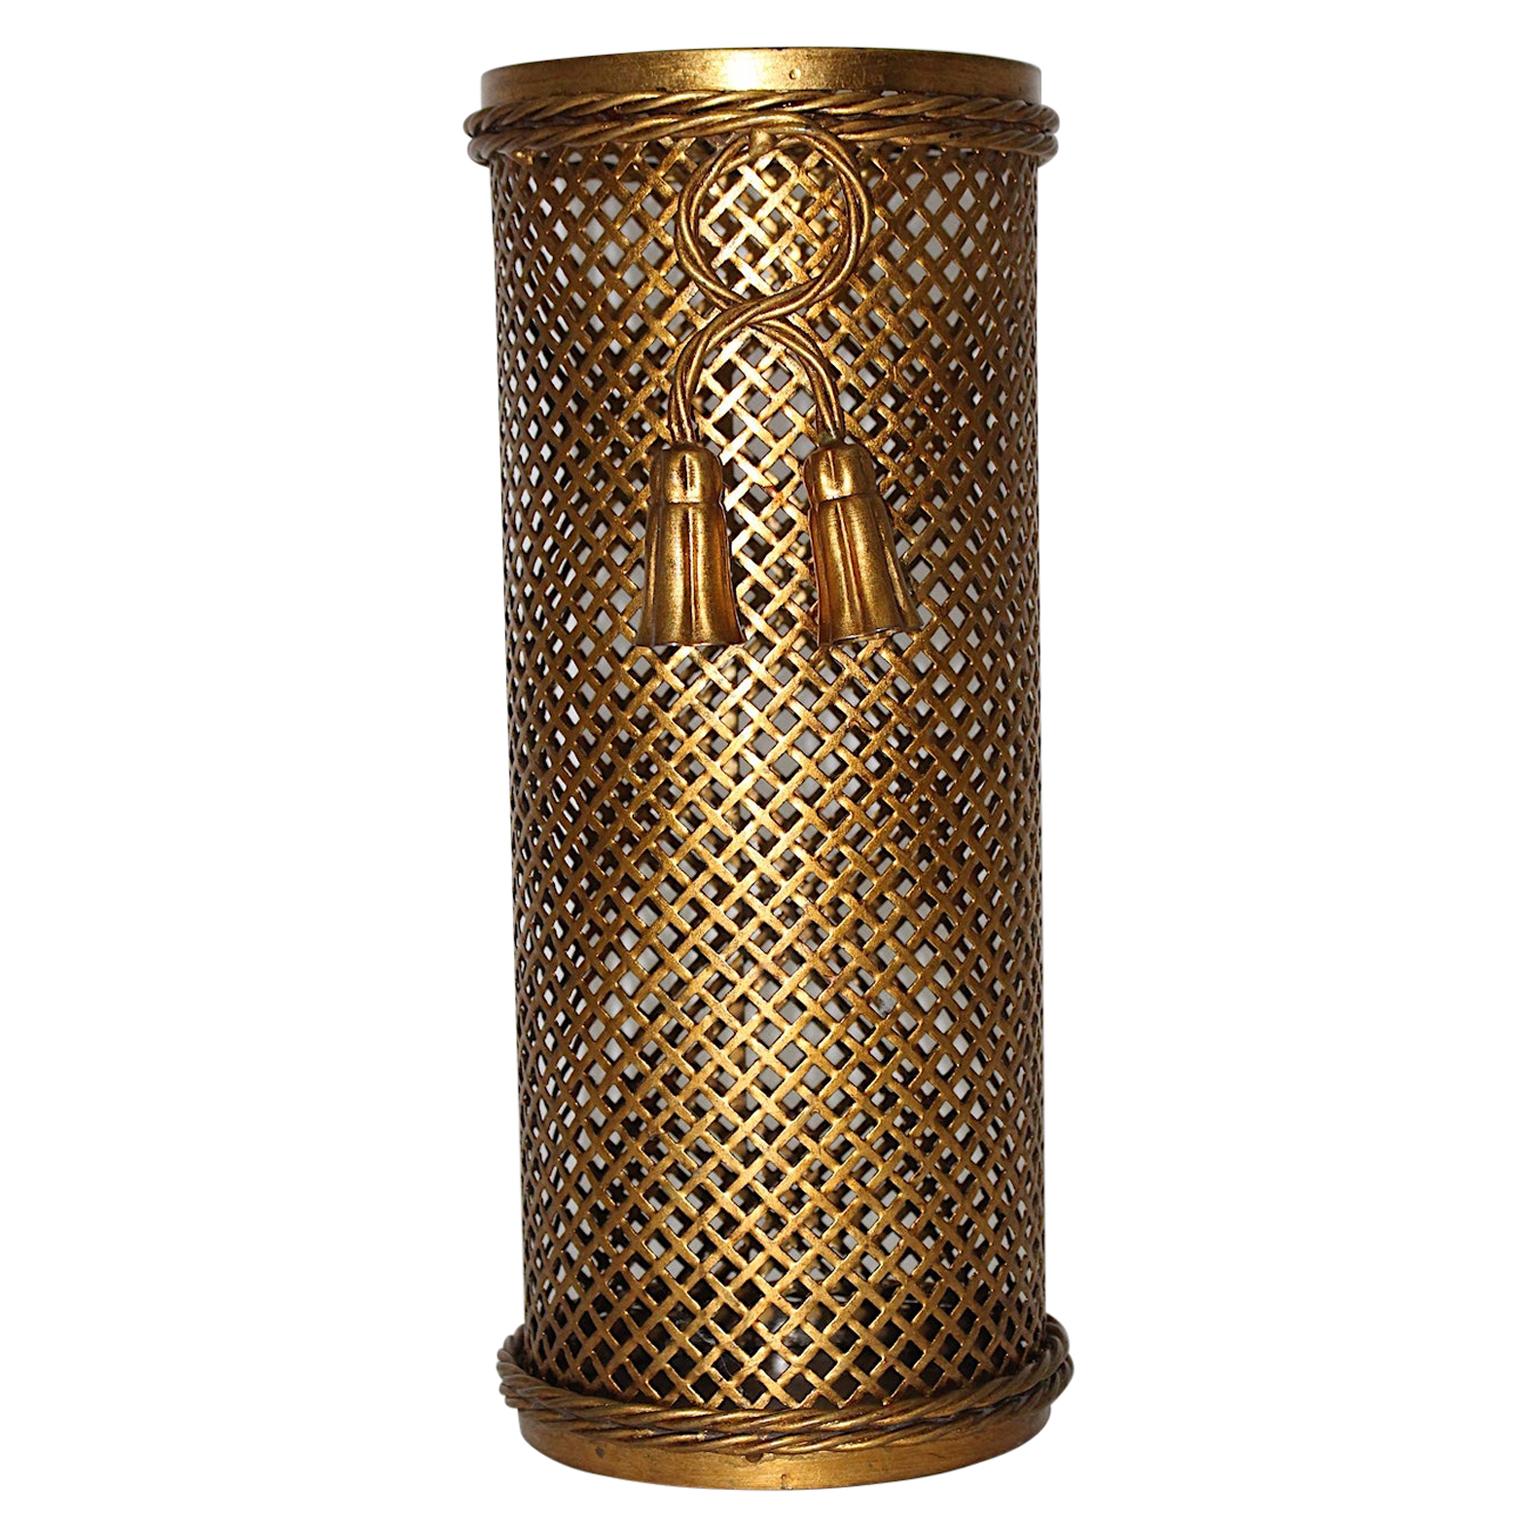 Hollywood Regency Style Gilded Umbrella Stand by Li Puma Firenze, 1950s, Italy For Sale